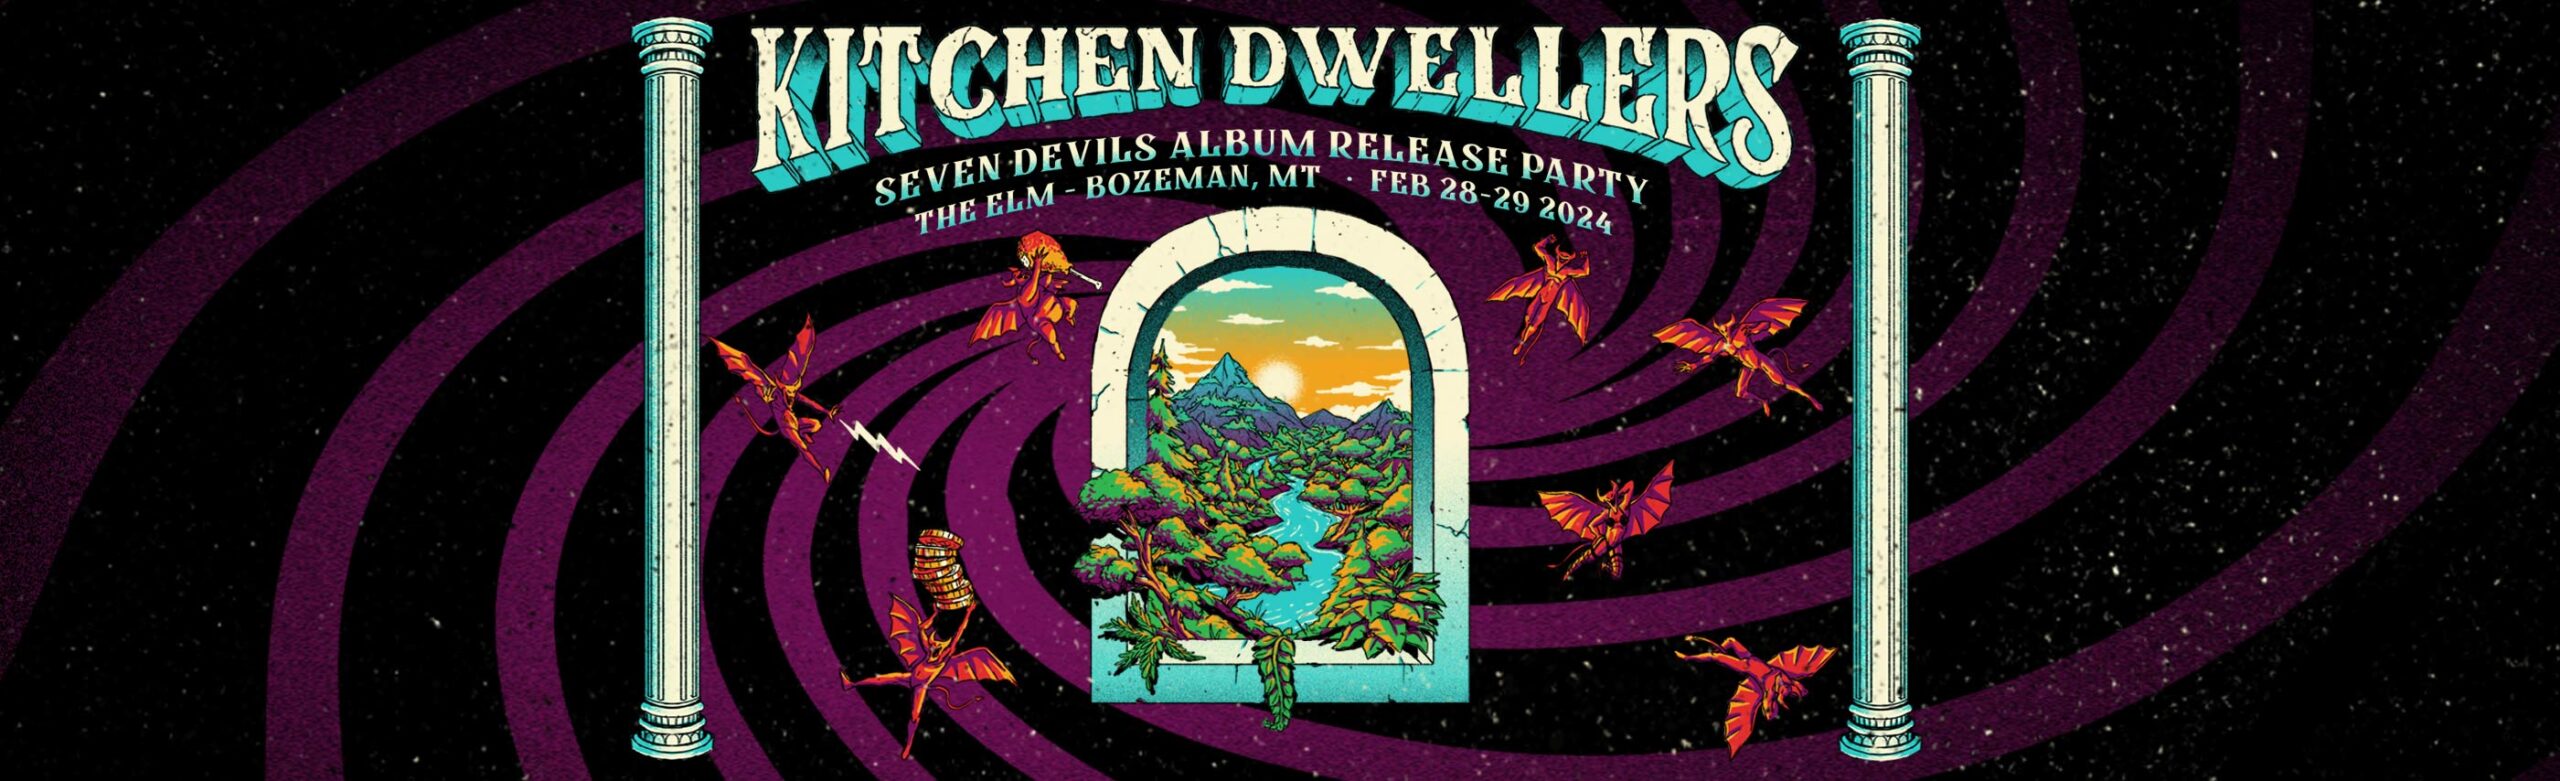 Kitchen Dwellers Announce Two-Night “Seven Devils” Album Release Party at The ELM Image